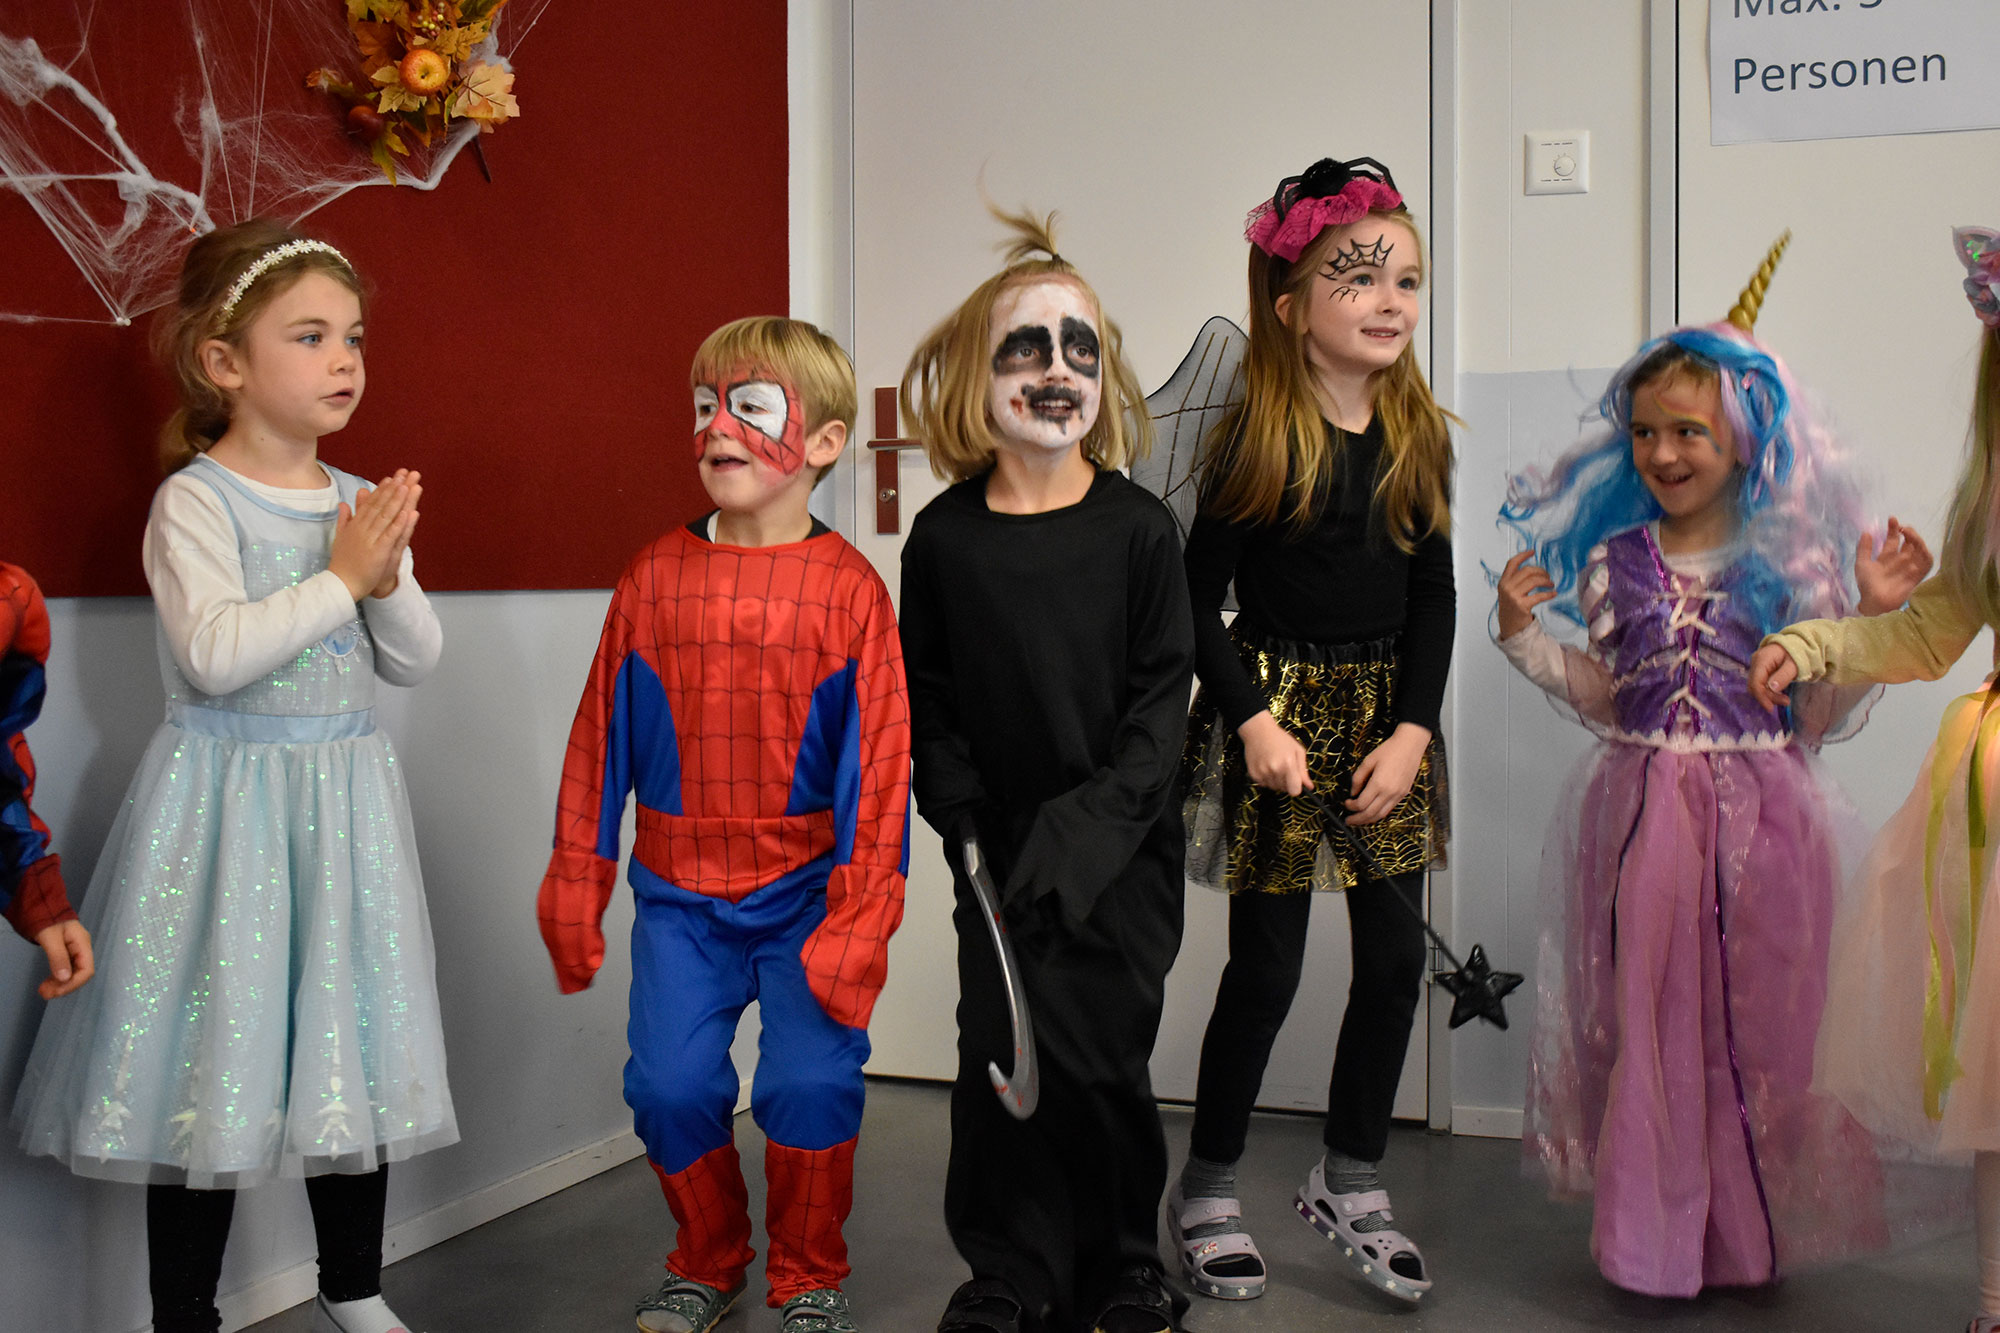 Students celebrate Halloween and wear colourful costumes. Some are dressed up as Spiderman or witches.	